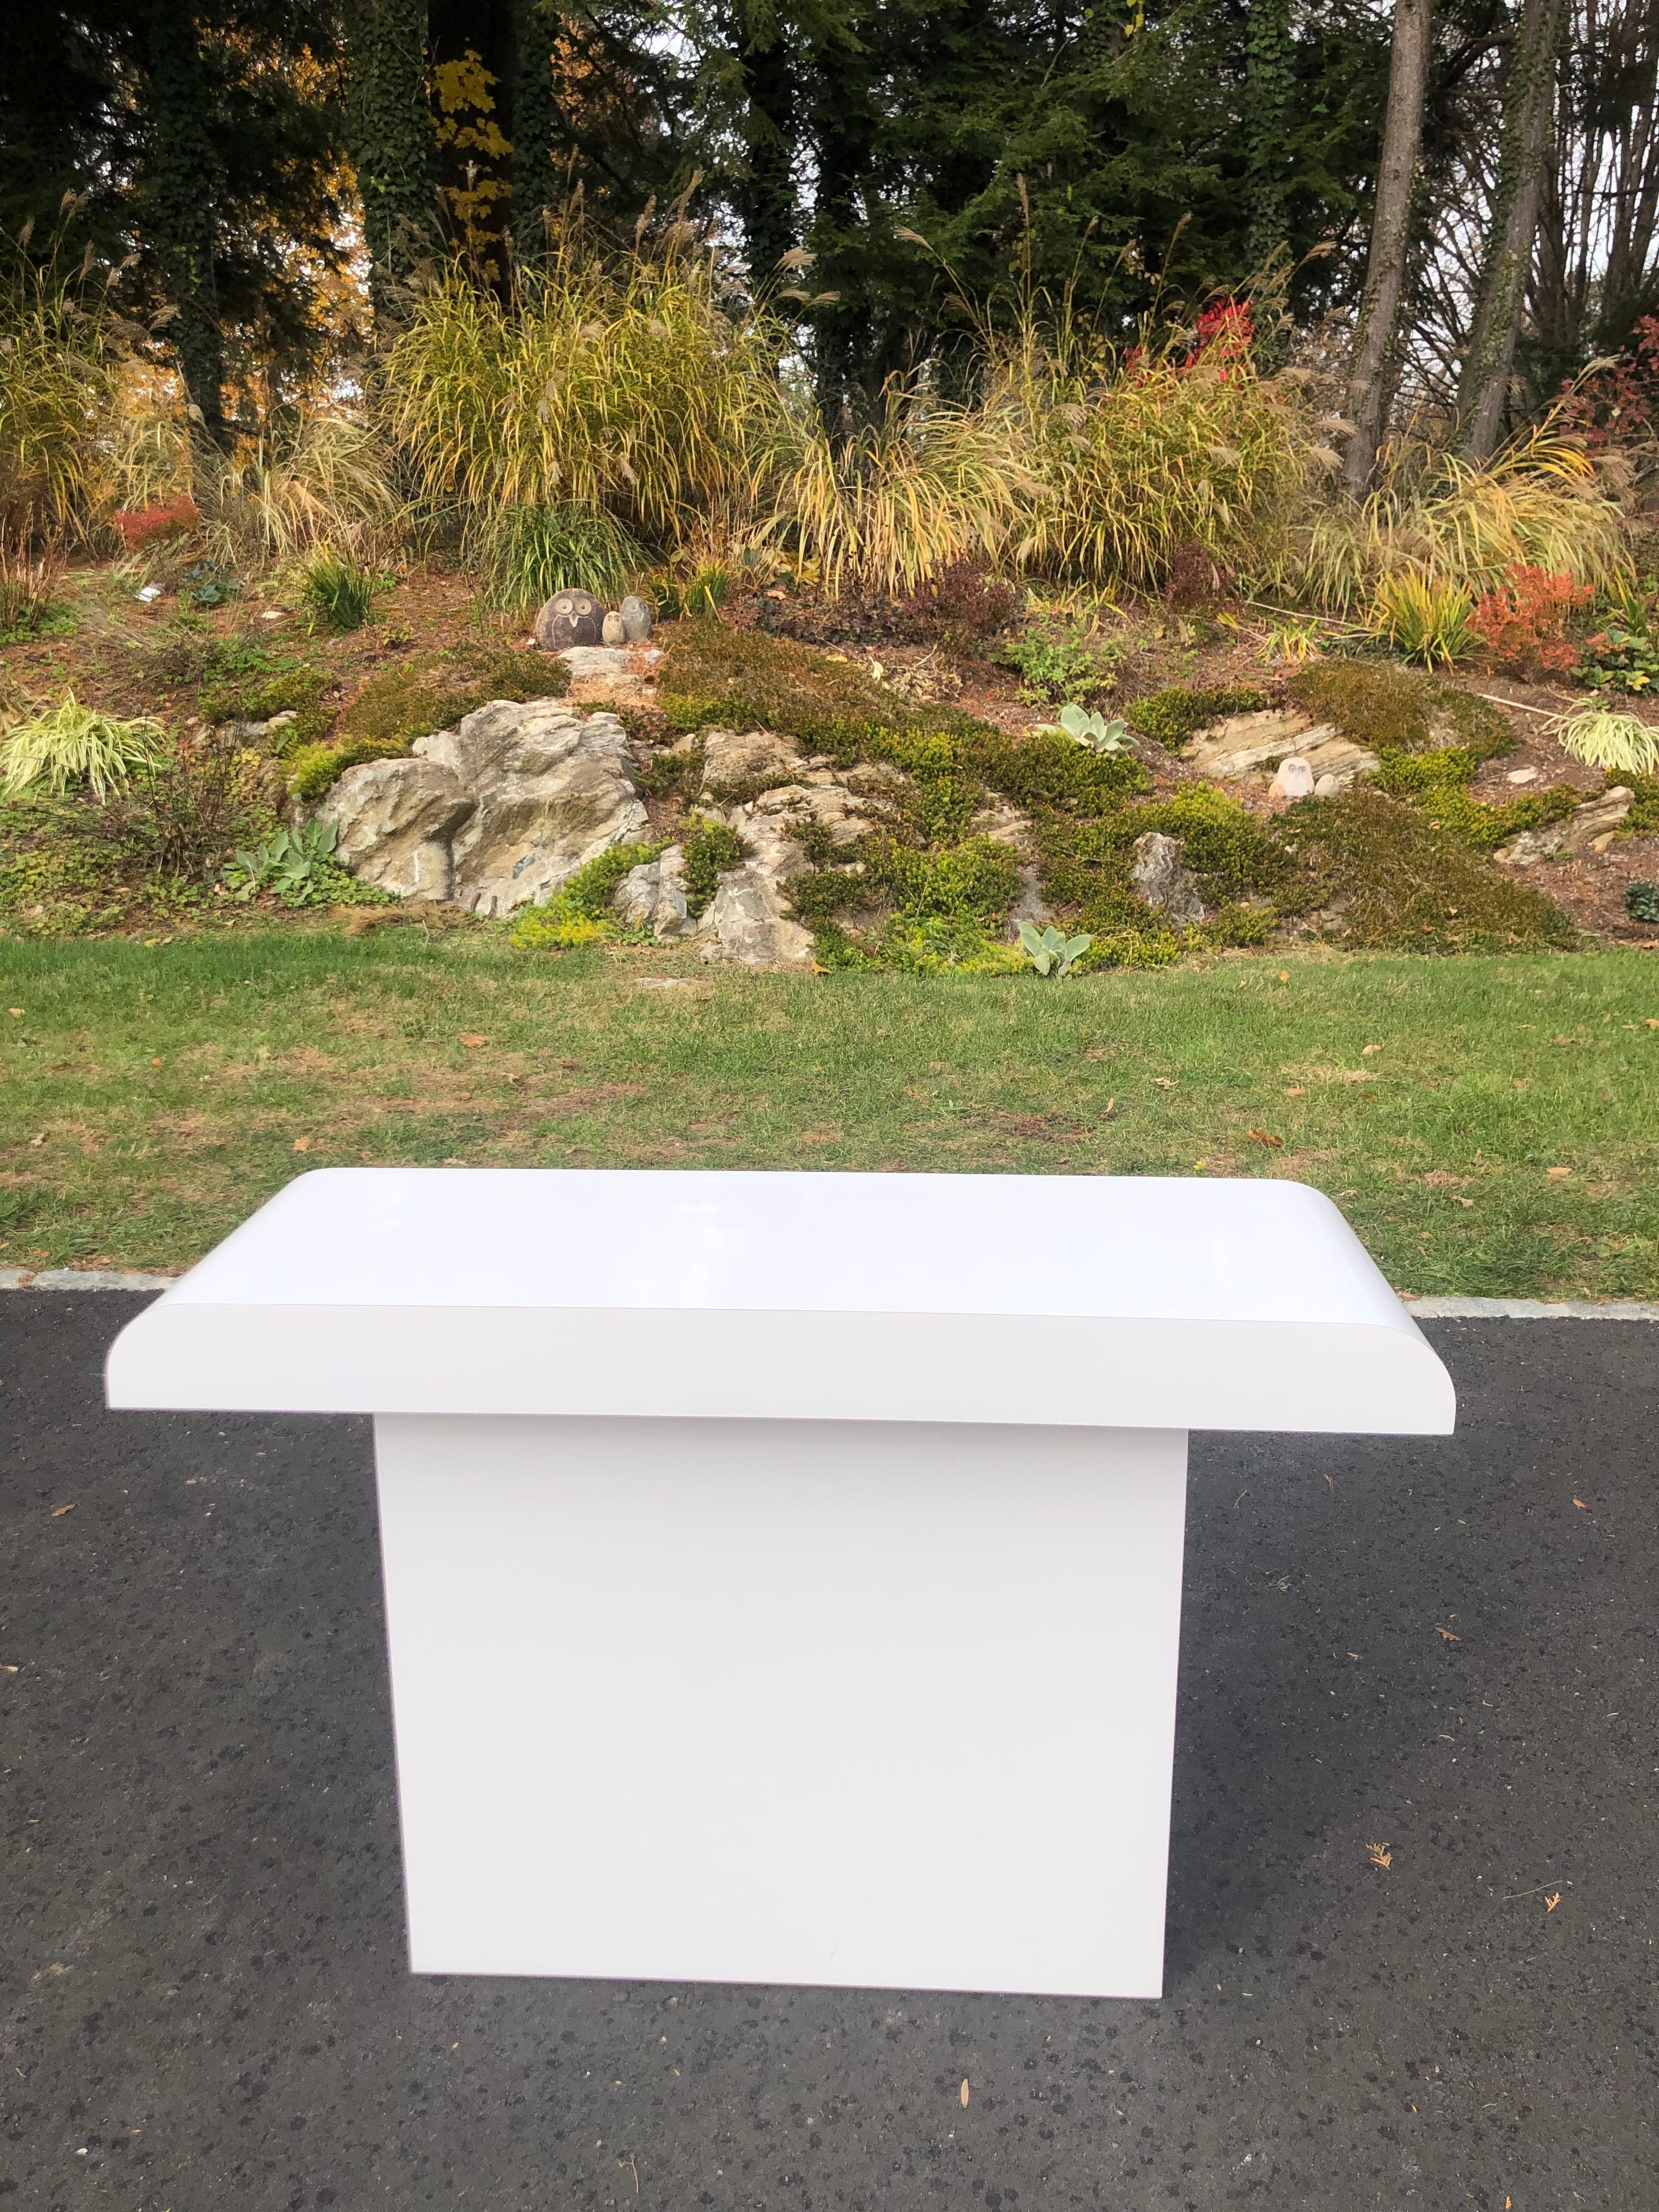 1980's Post Modern white laminate console table. Mint condition. Clean, minimalist lines.
Perfect for an entry way, dressing room / closet or use as a sofa table. Nice high gloss white finish,